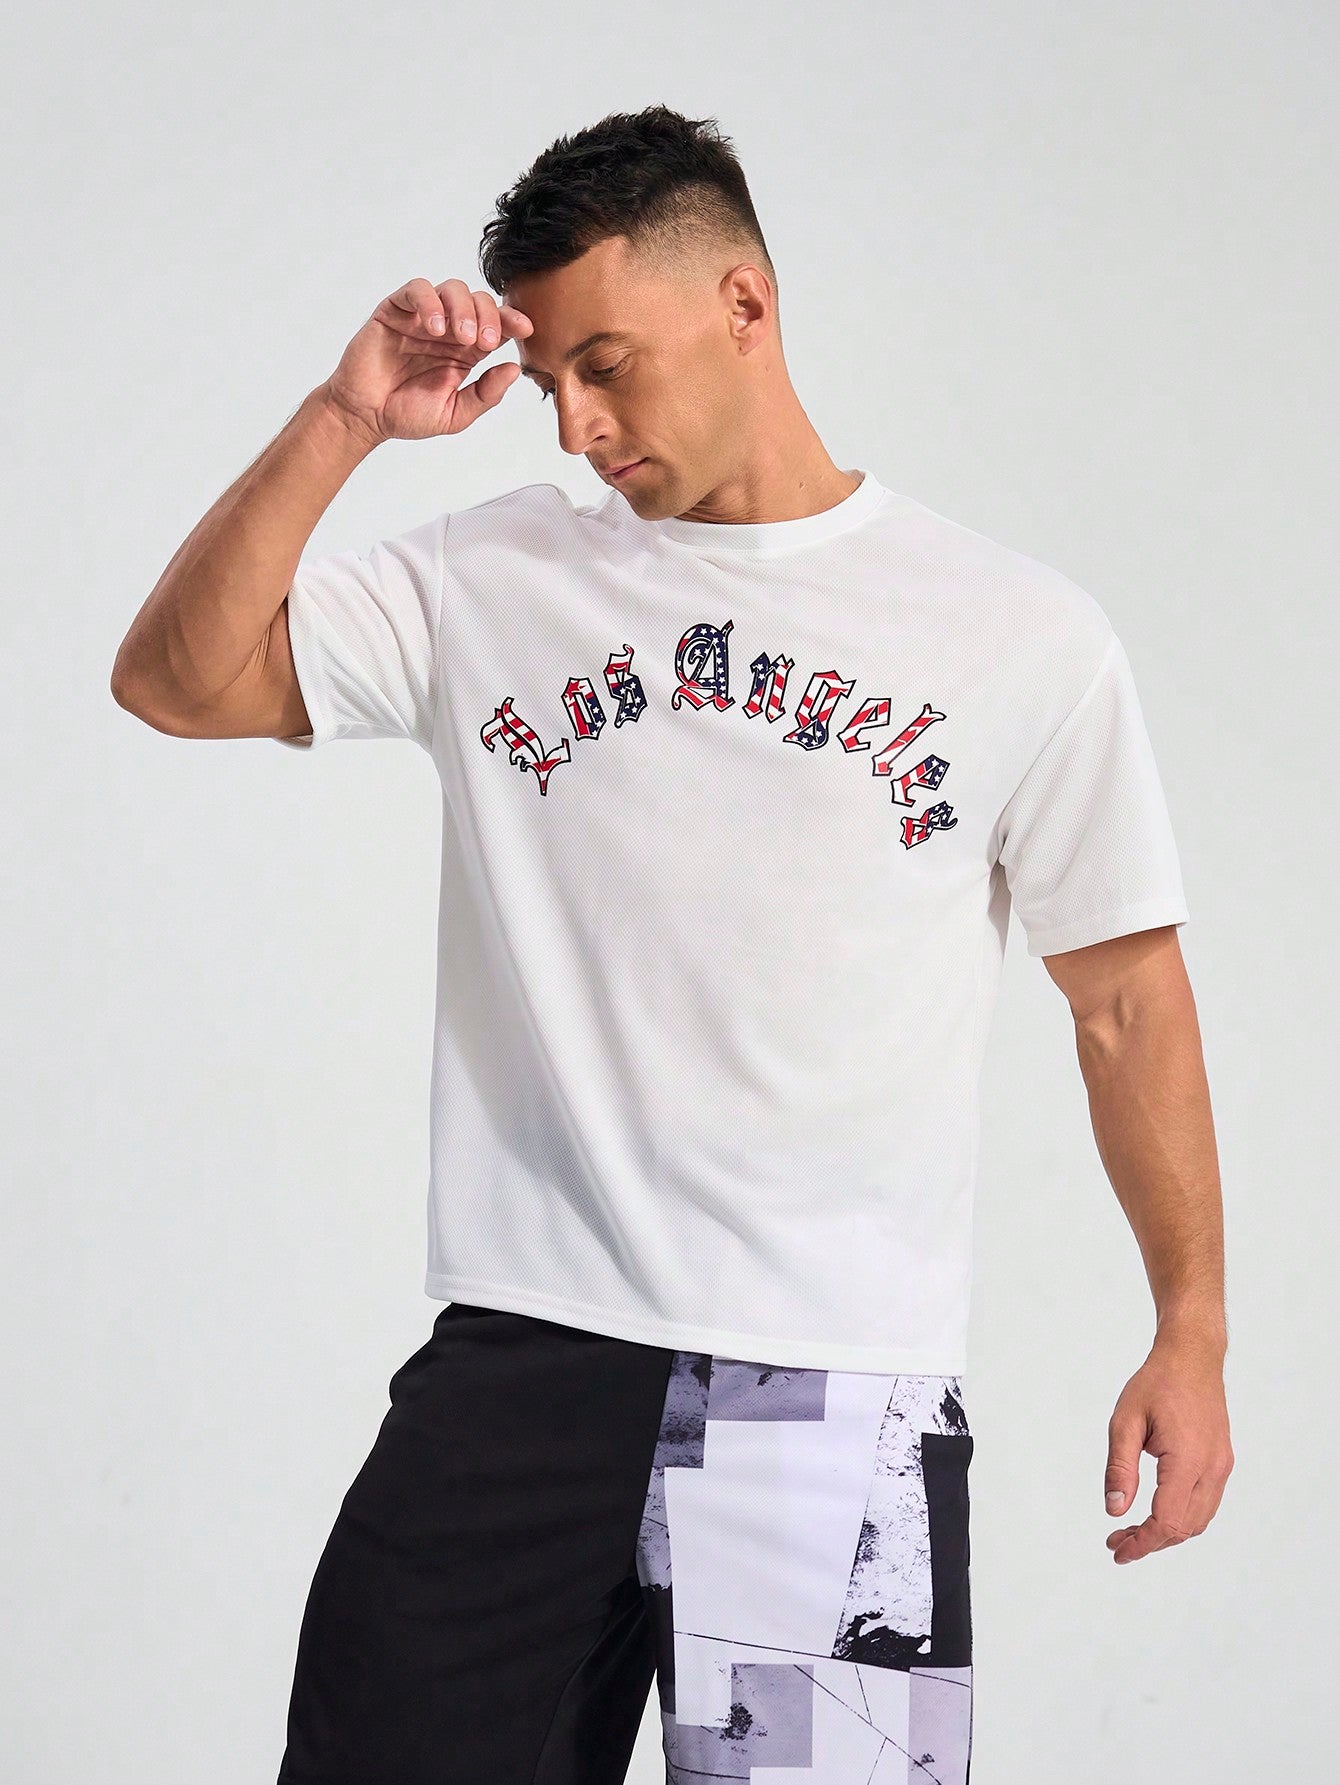 Men's Simple Printed Short Sleeve Sports T-Shirt Workout Tops